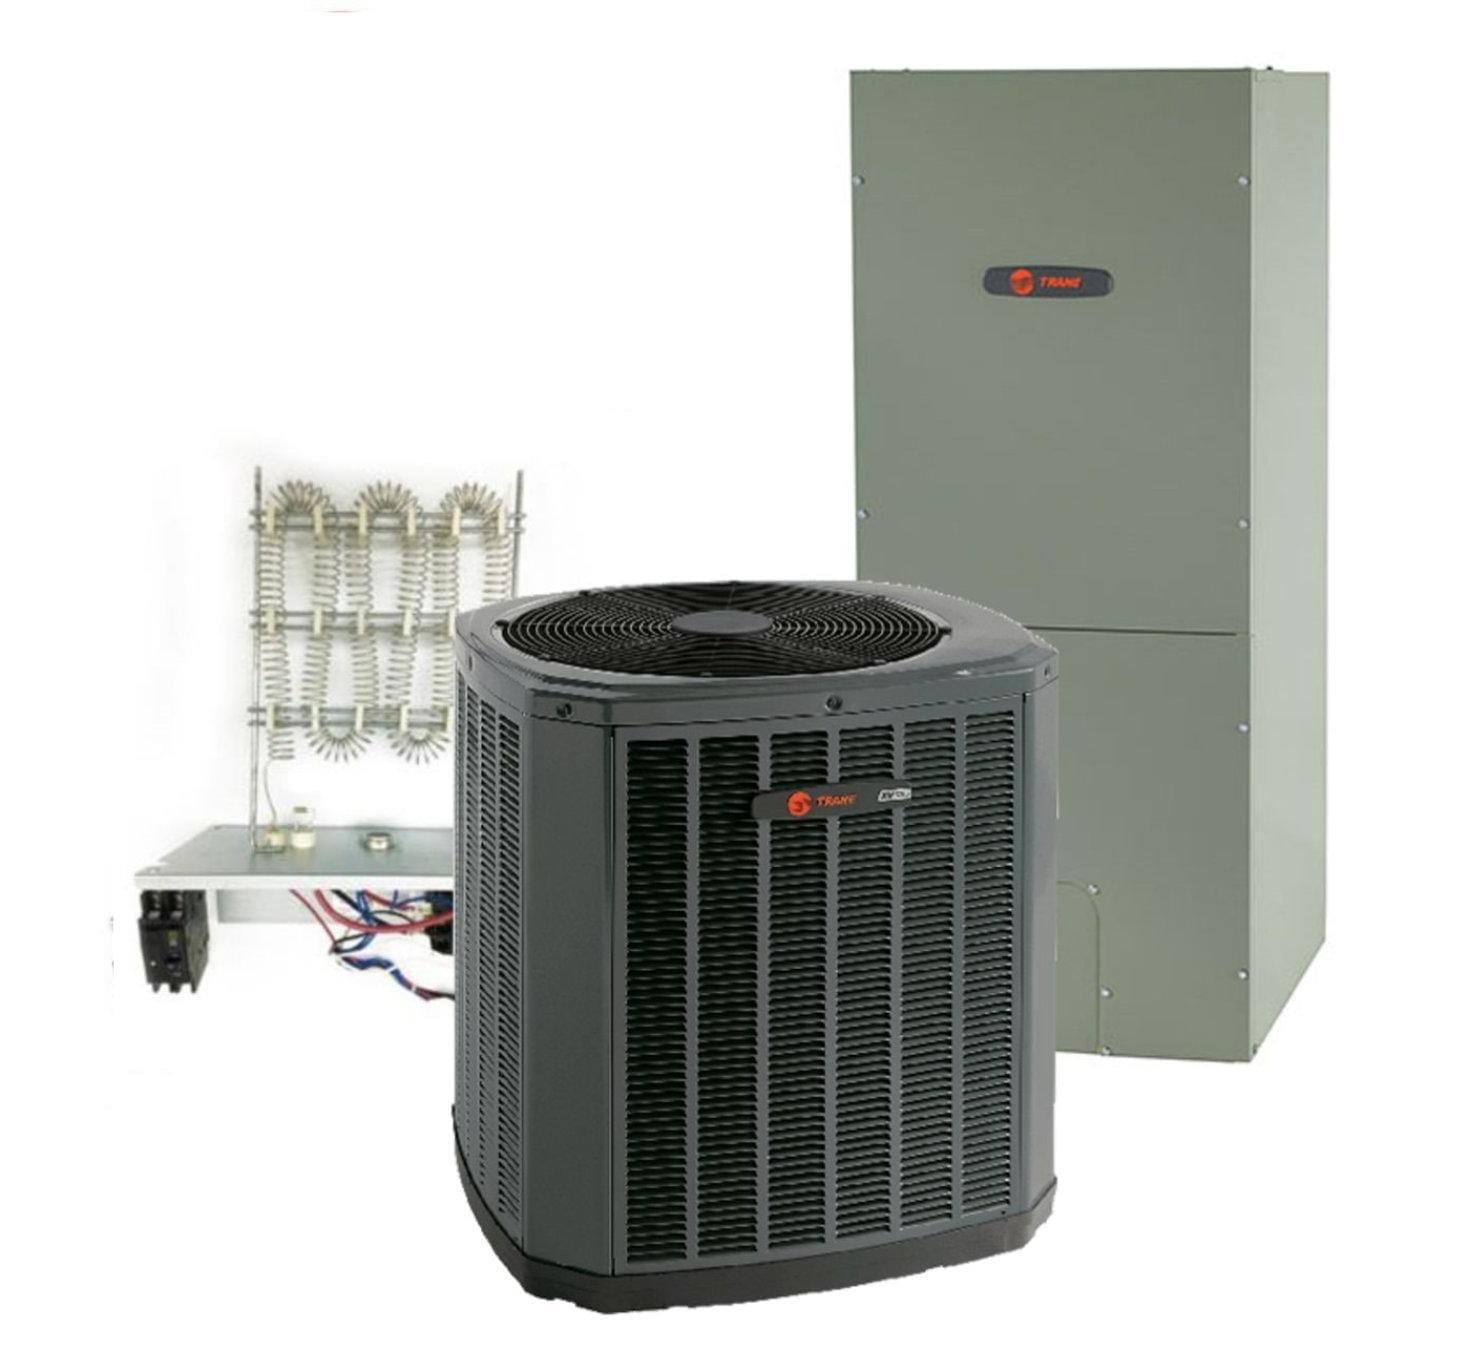 Air Cooled Chillers Trane Commercial Refrigeration And Air Conditioning Air Conditioning System Hvac Maintenance